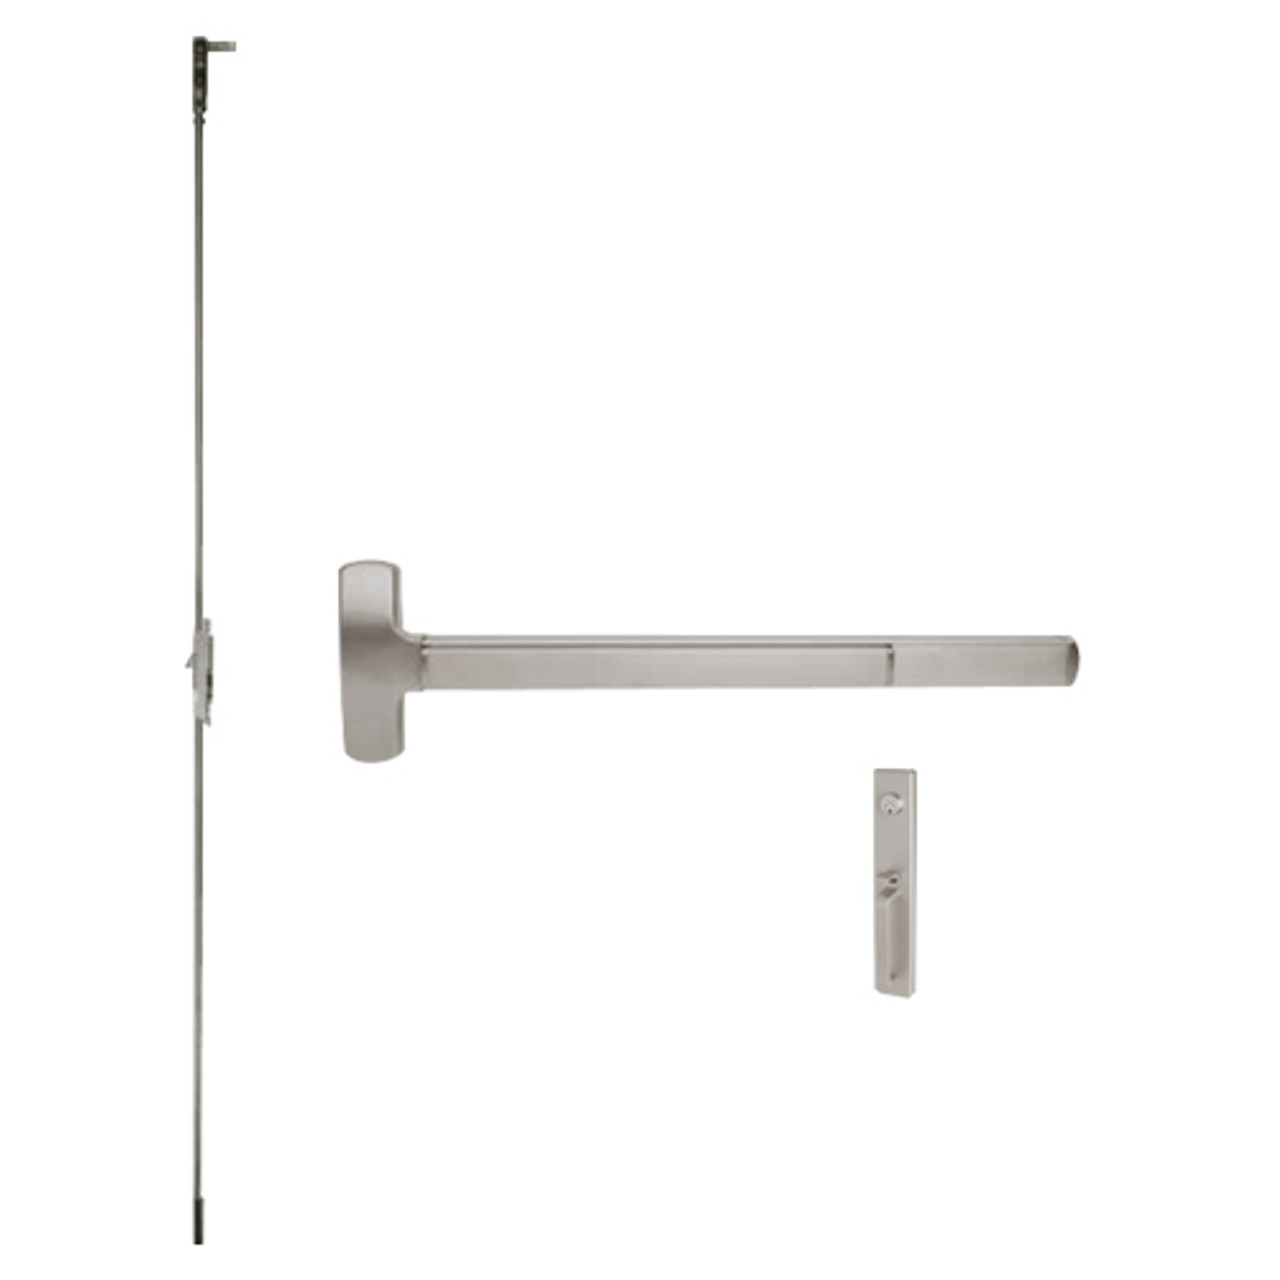 F-25-C-TP-US32D-4 Falcon Exit Device in Satin Stainless Steel